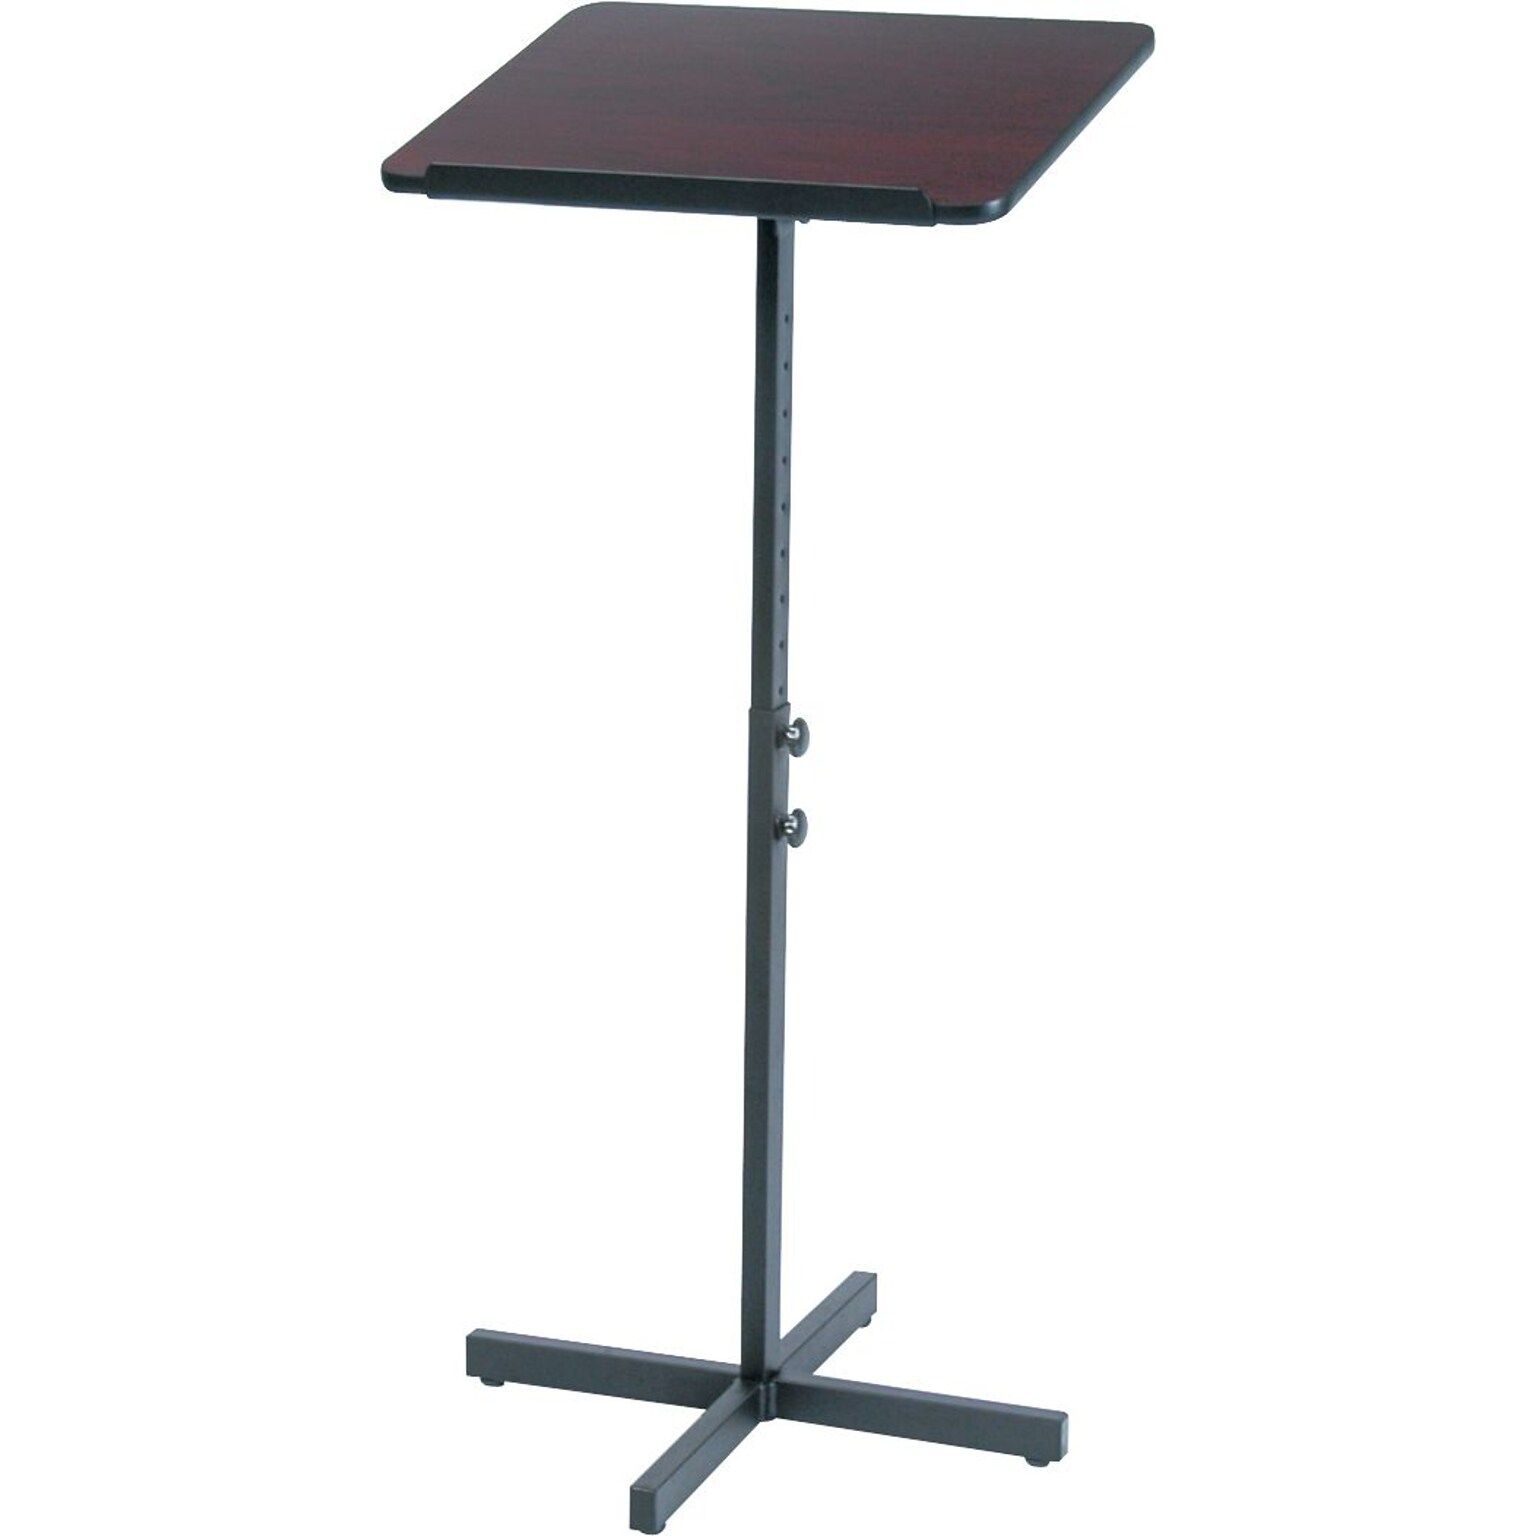 Safco Adjustable Speaker Stands, Mahogany (8921MH)